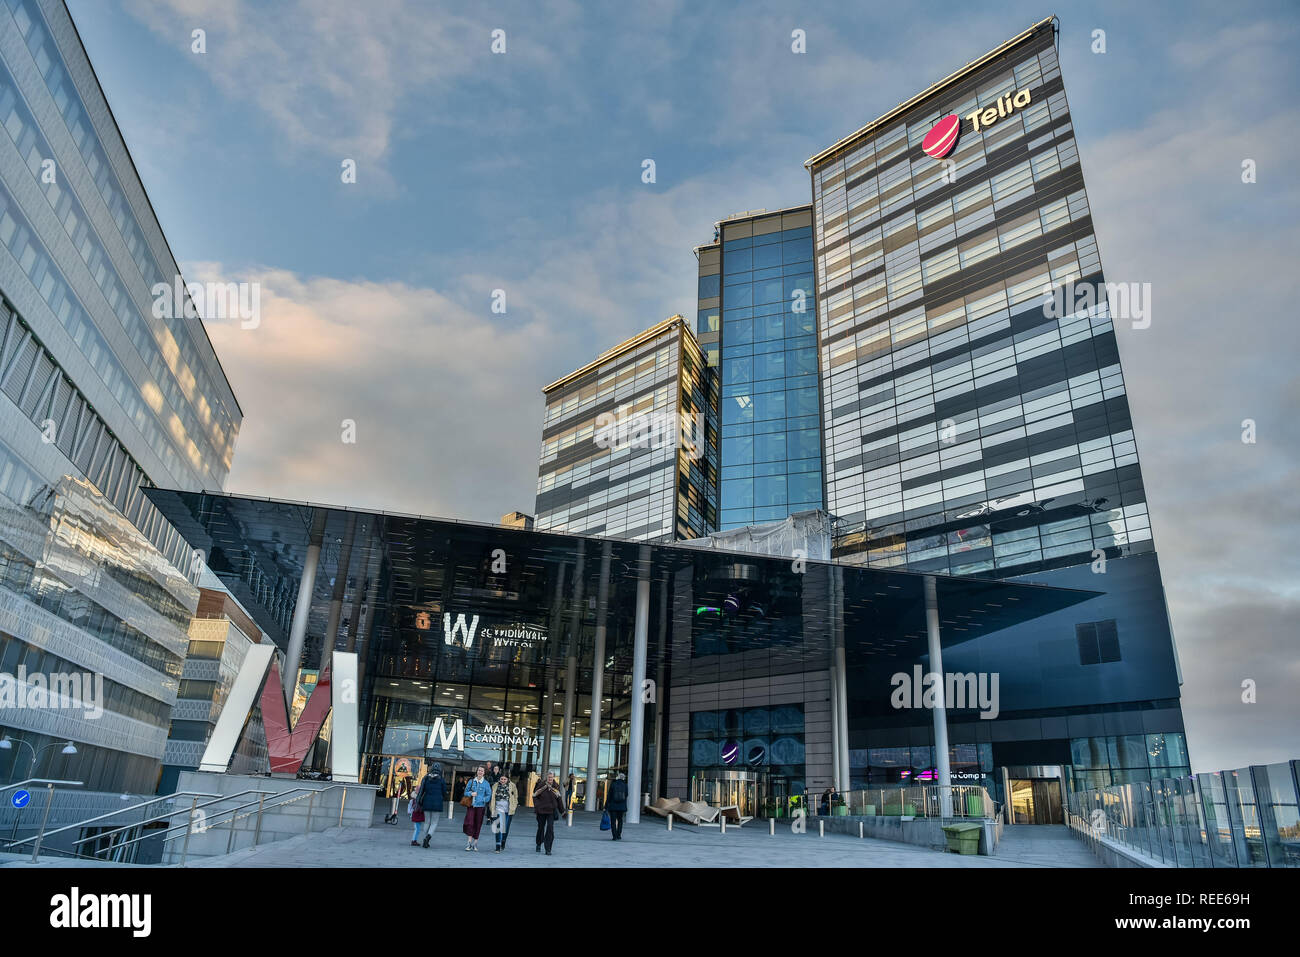 Solna Center High Resolution Stock Photography and Images - Alamy